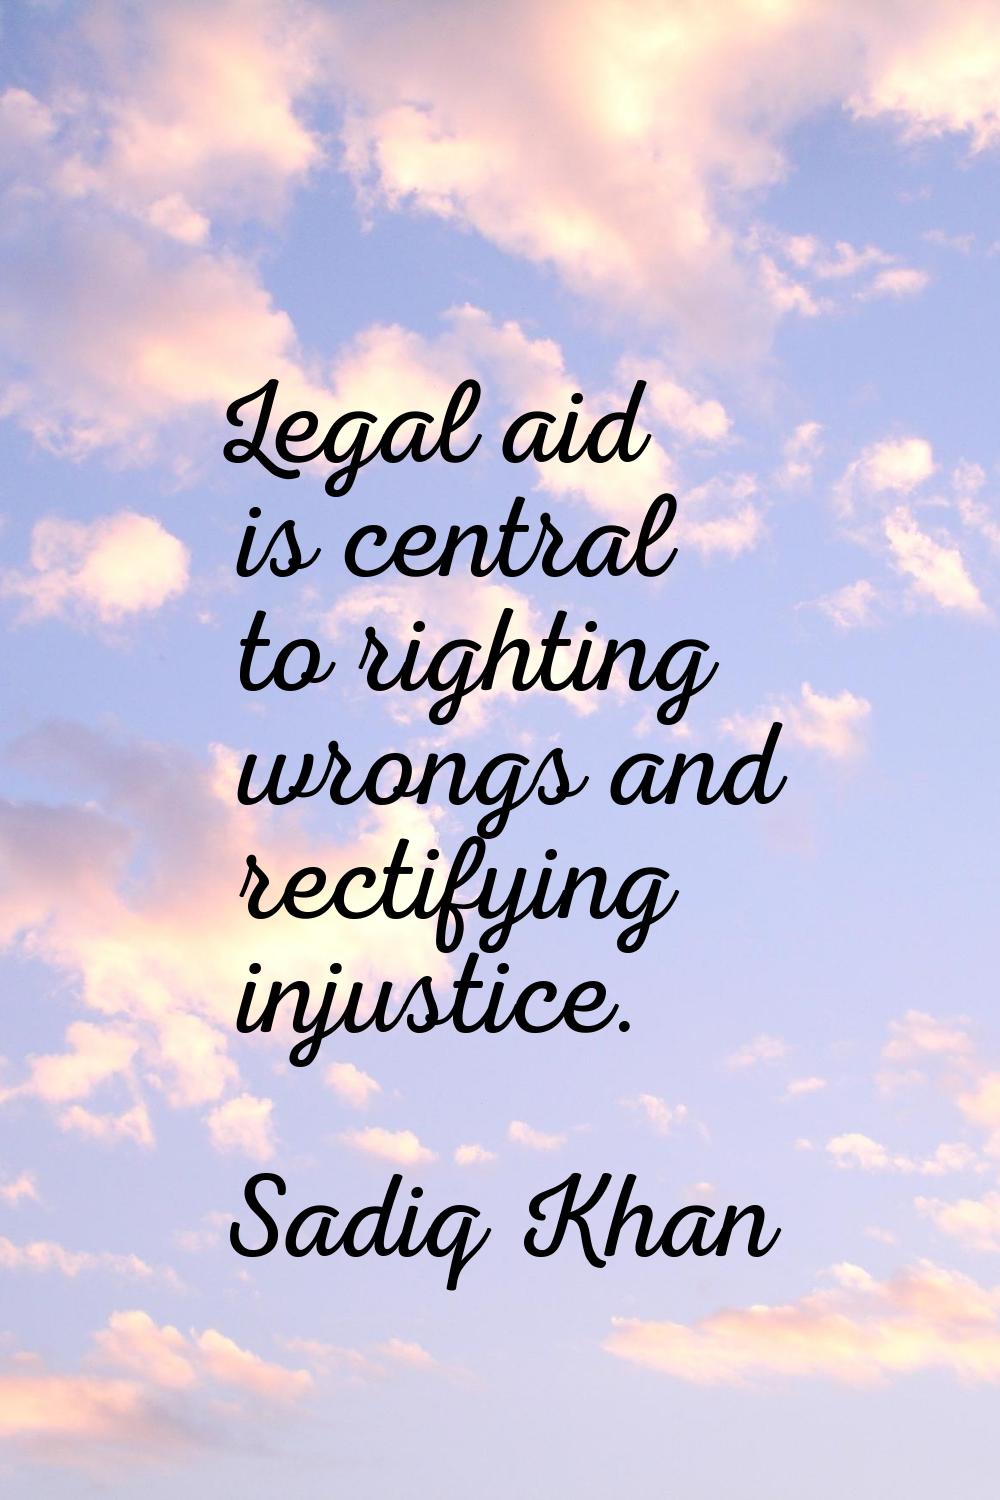 Legal aid is central to righting wrongs and rectifying injustice.